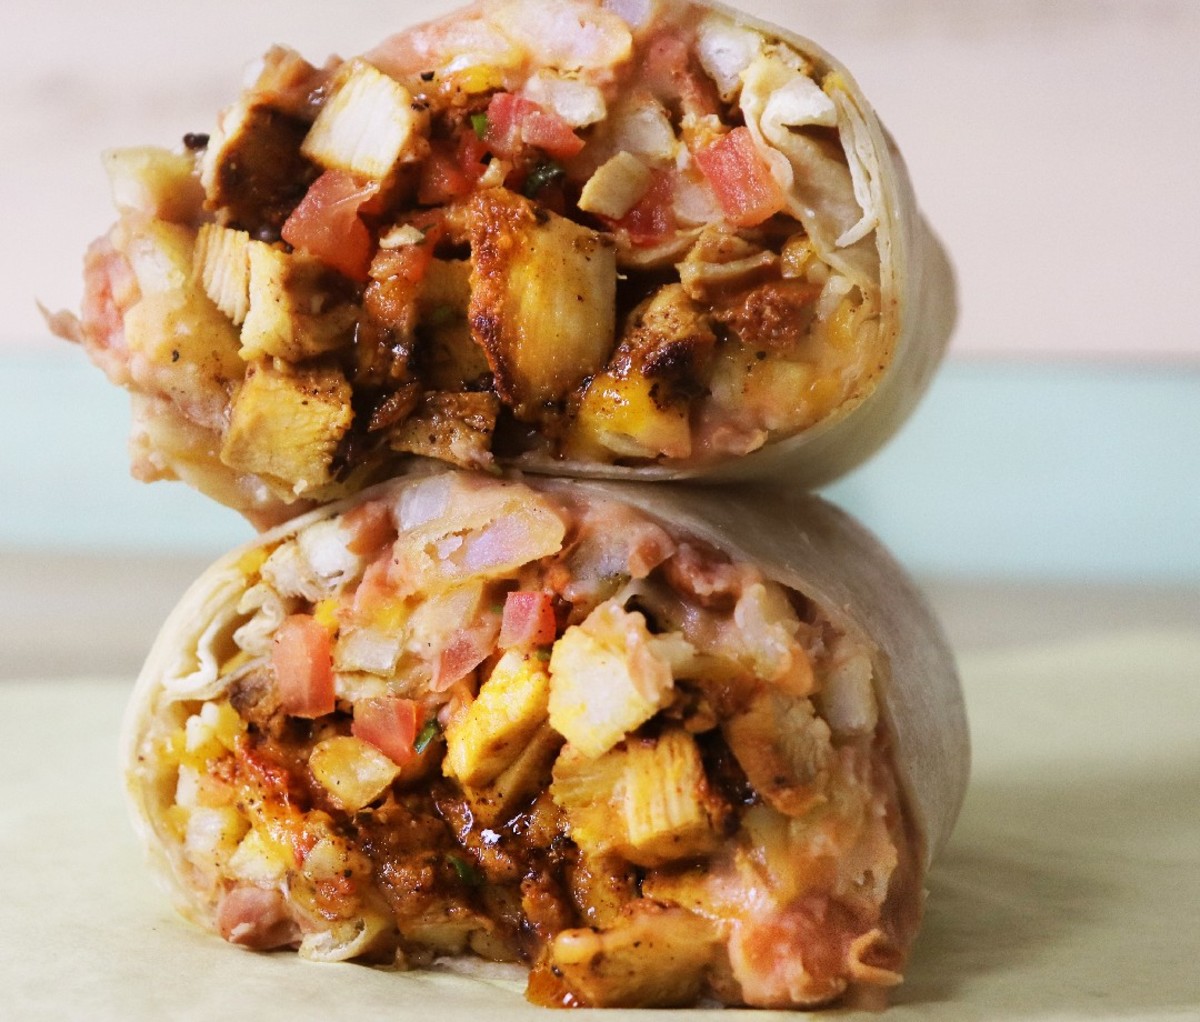 Two halves of a burrito stacked from NY's Electric Burrito